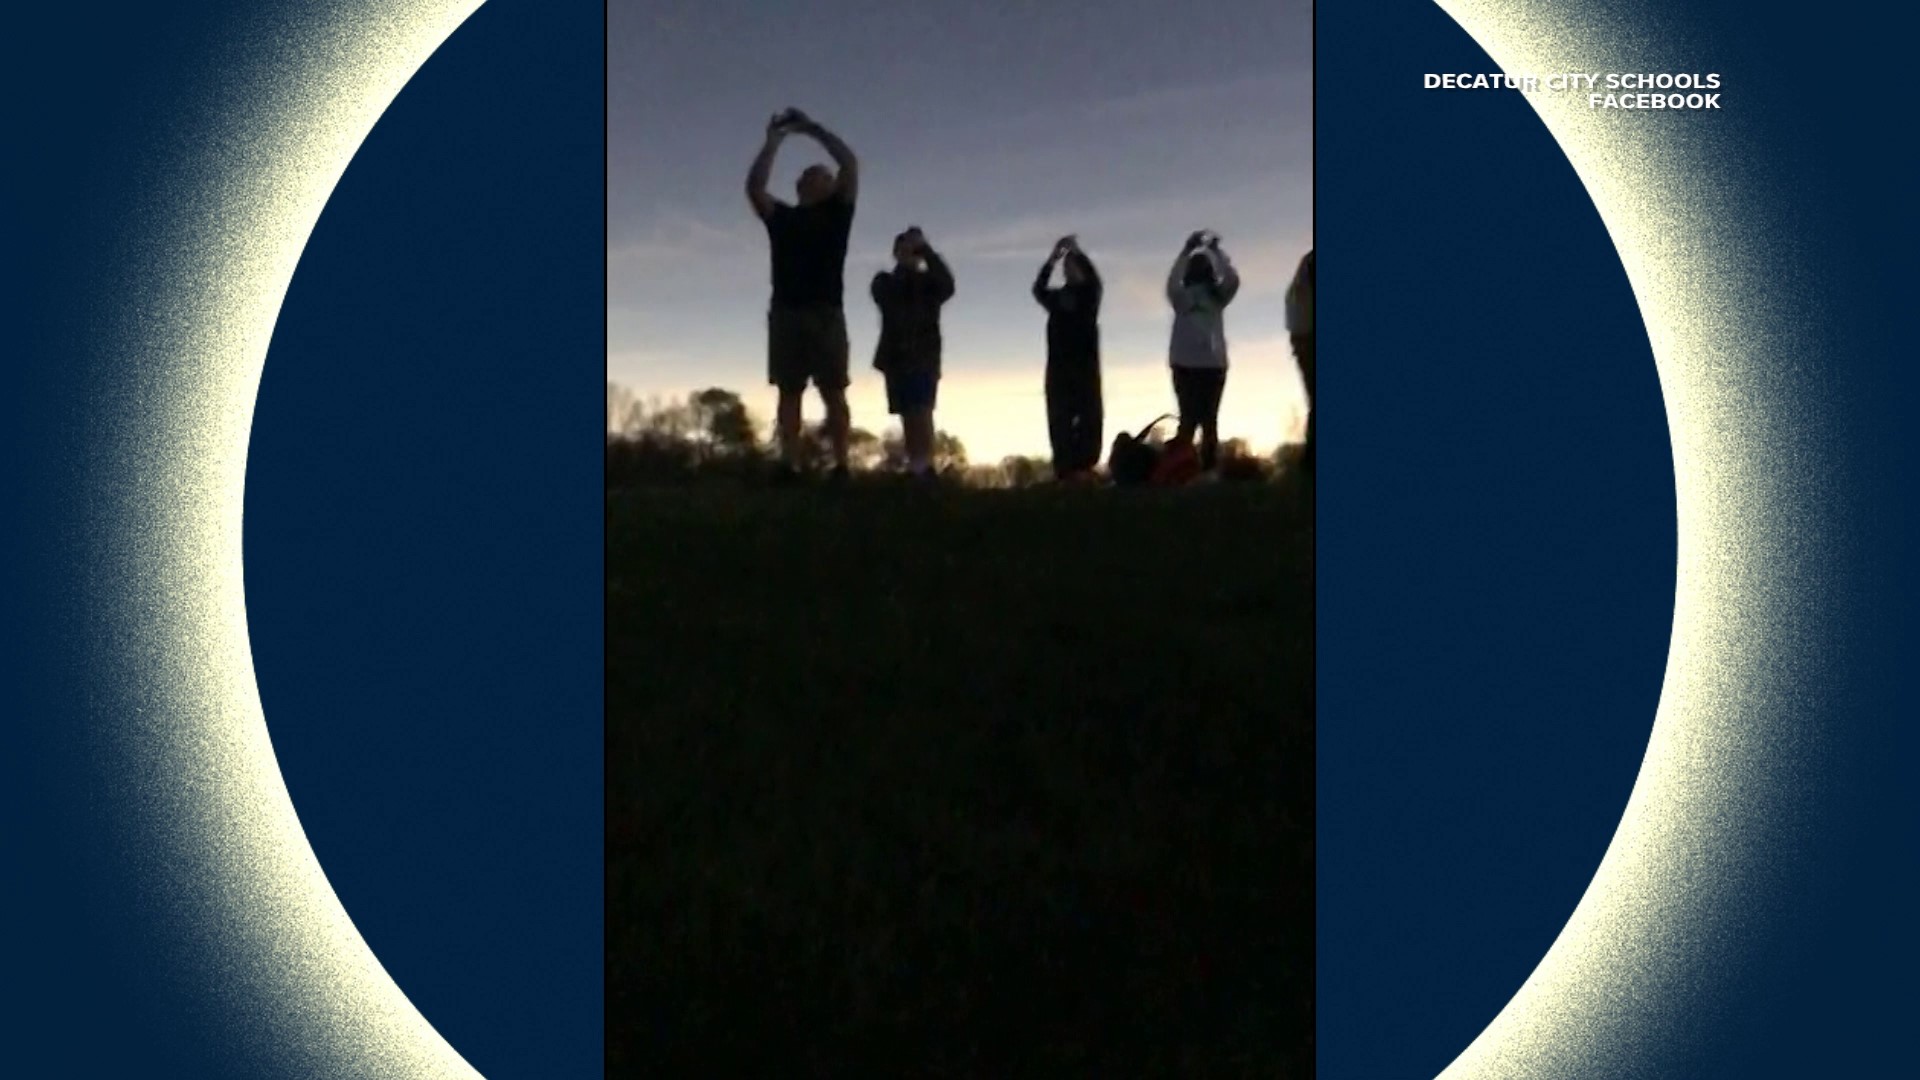 Students, teachers and parents traveled to Missouri to be in the path of totality of the April 8 total solar eclipse and livestreamed the event.